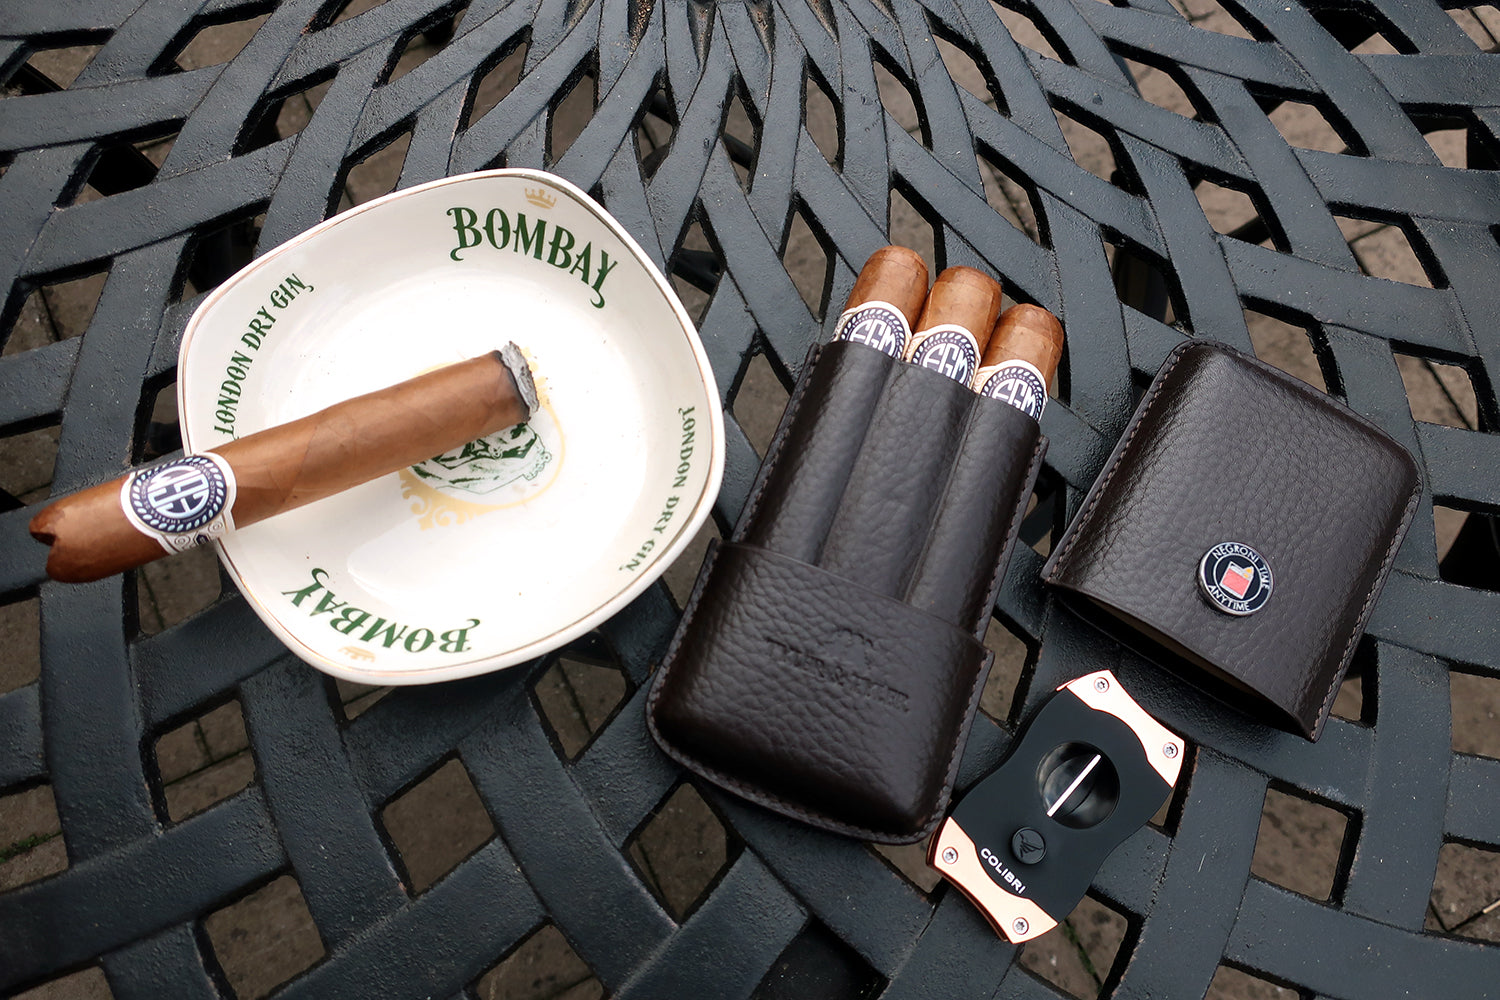 TYLER & TYLER Luxury Real Leather Cigar Case Negroni Time Anytime